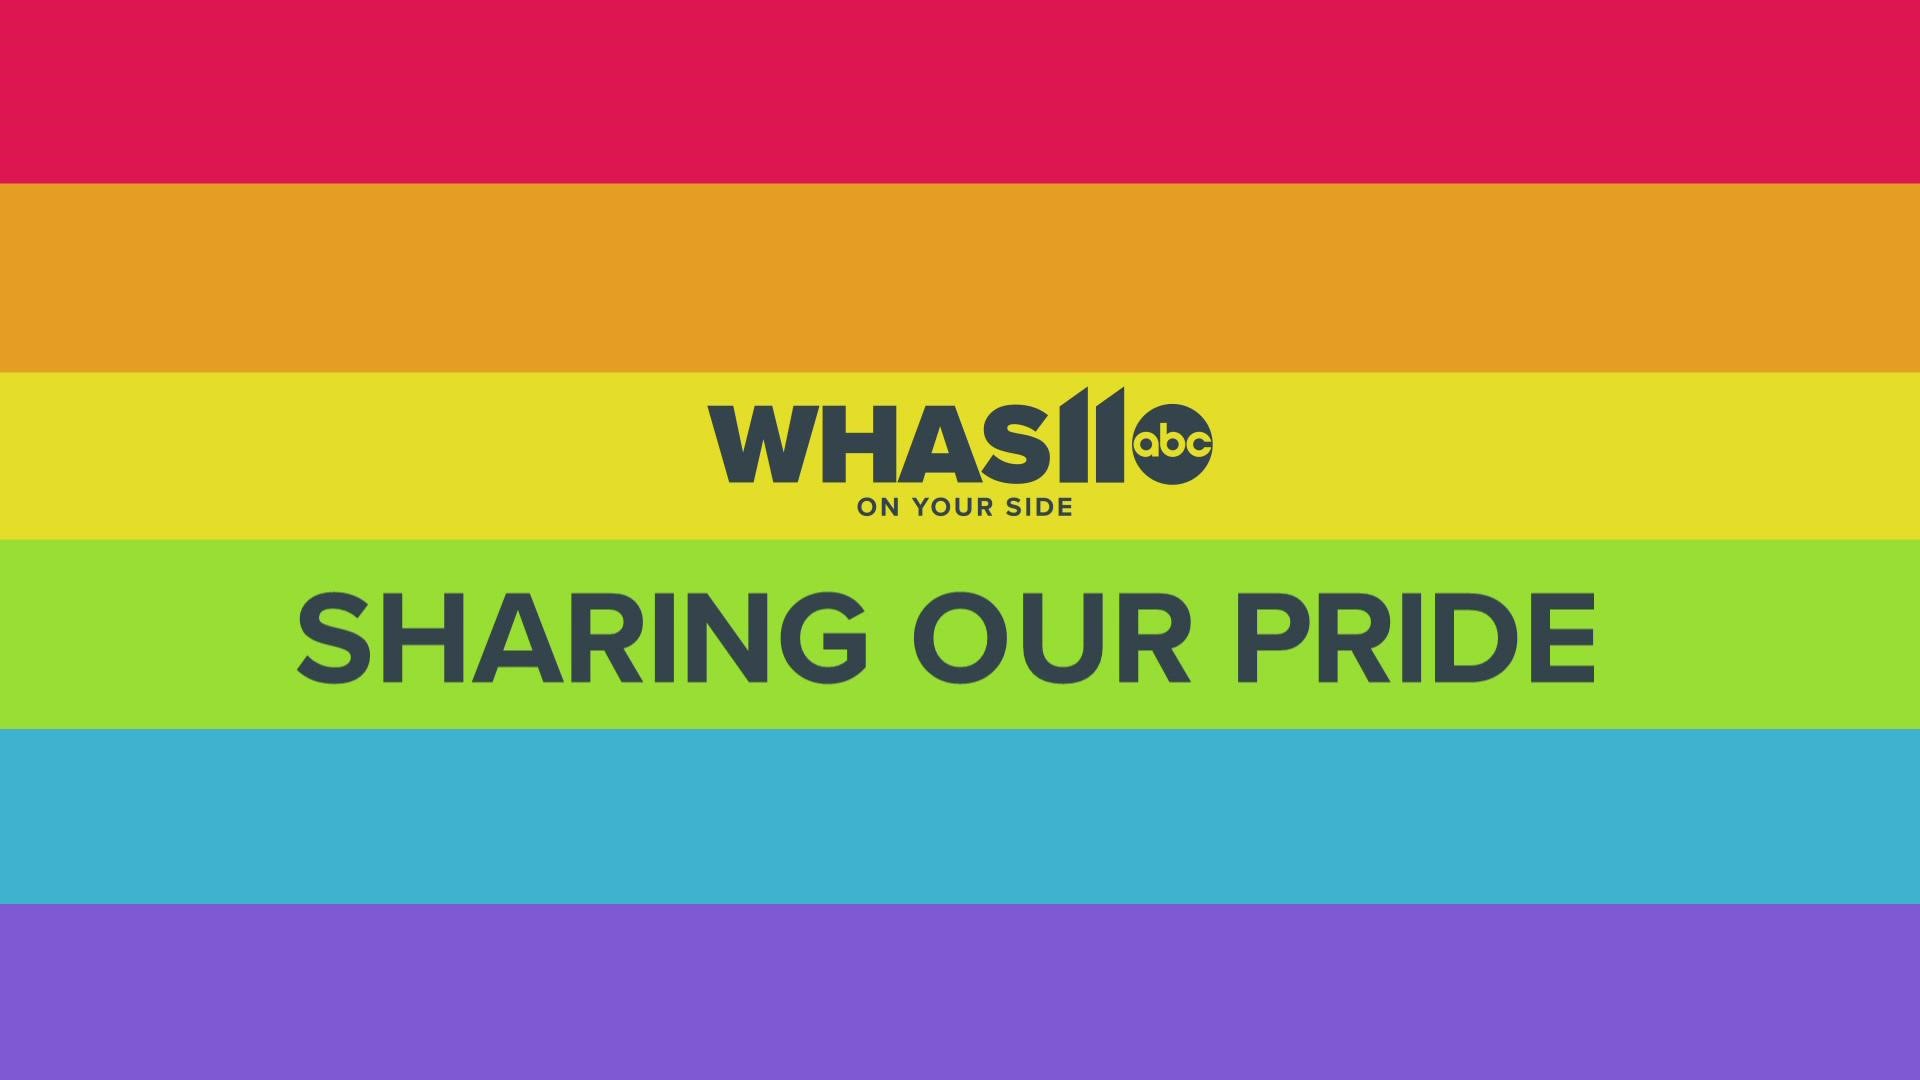 WHAS11 staff shared their coming out stories and how they learned to accept themselves both inside and outside the newsroom.